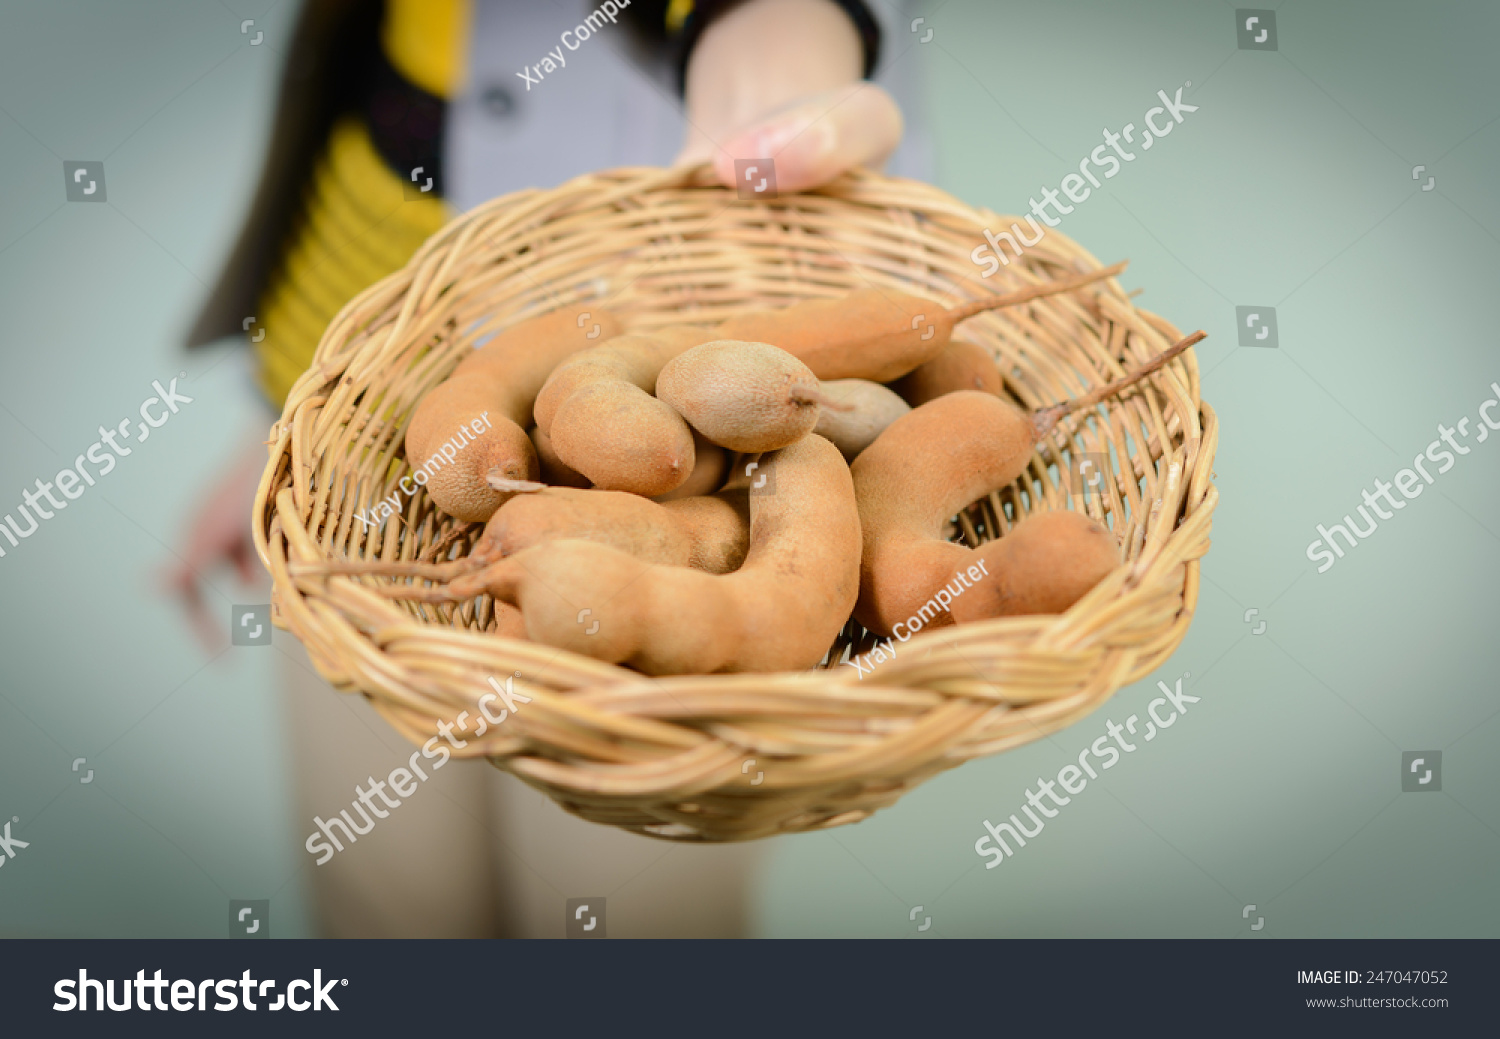 woman hold Tamarinds in wicker basket #247047052